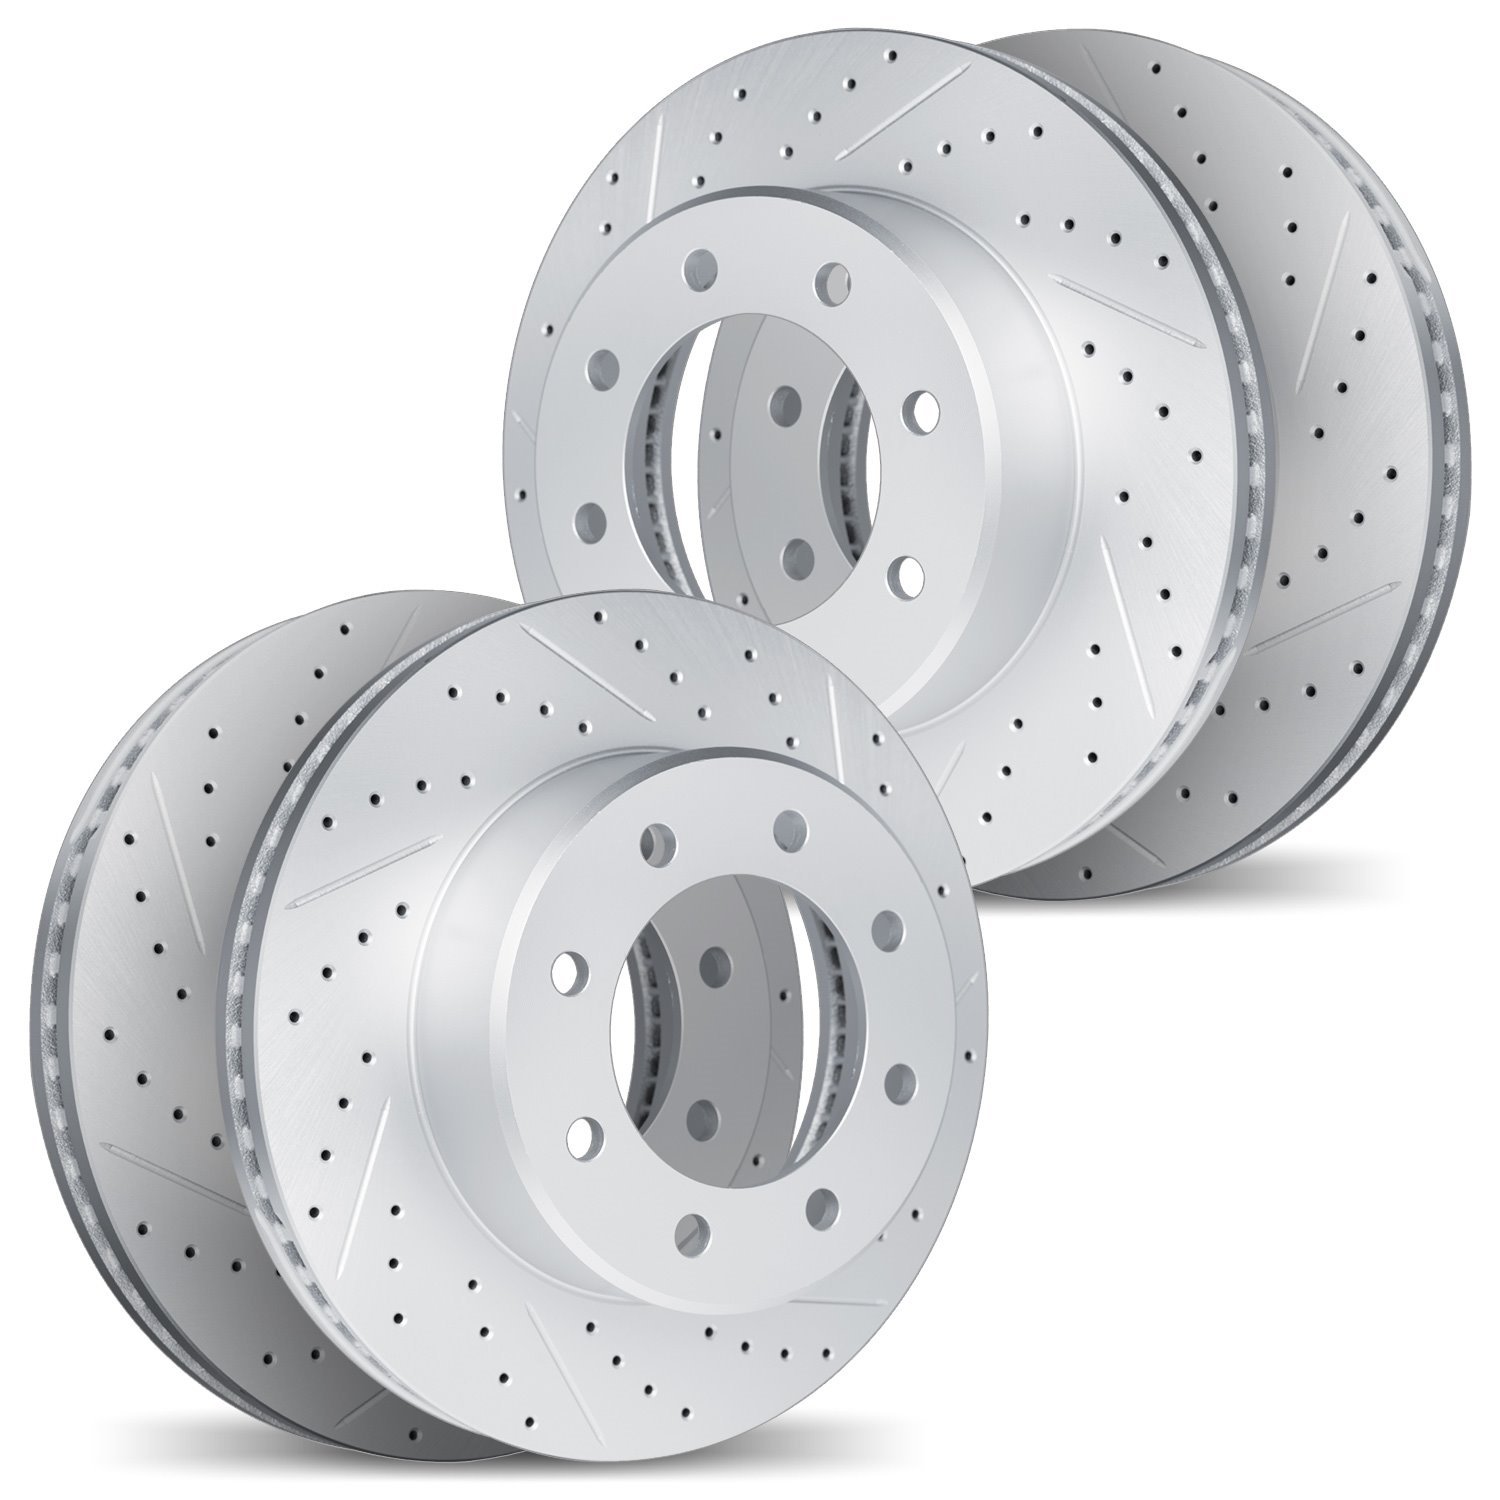 2004-54059 Geoperformance Drilled/Slotted Brake Rotors, 2003-2005 Ford/Lincoln/Mercury/Mazda, Position: Front and Rear